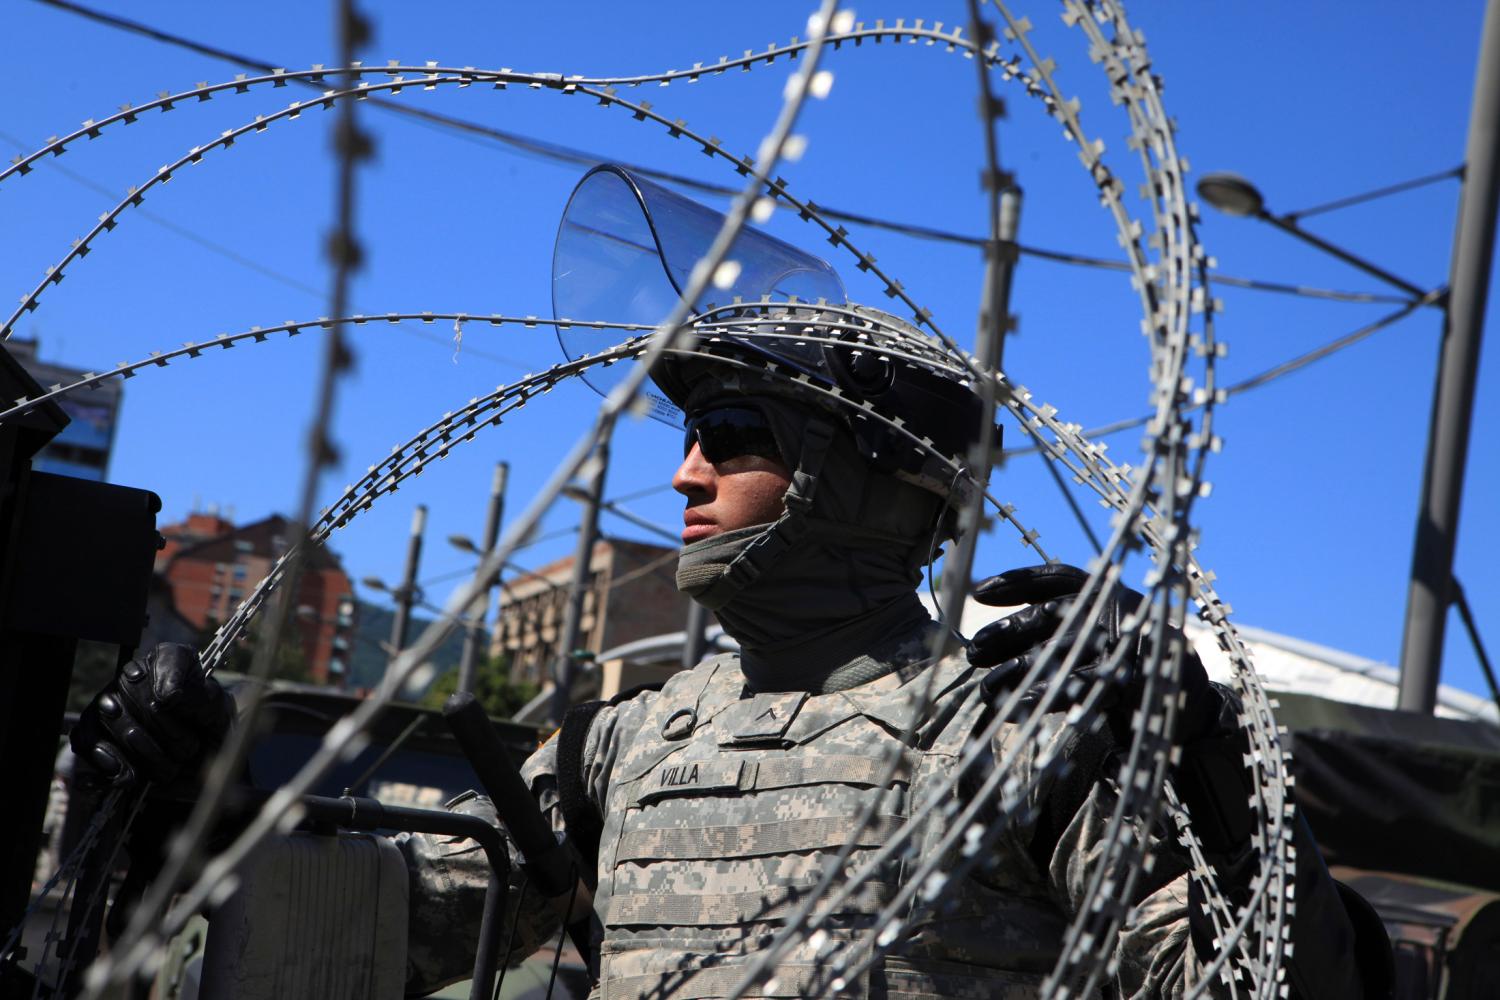 A U.S. soldier, part of a NATO peace force, places barbed wire on his Humvee during a protest in the ethnically divided town of Mitrovica June 22, 2014. Police in Kosovo fired tear gas and rubber bullets on Sunday at ethnic Albanian rioters burning police cars and lobbing rocks in Mitrovica, in protest over the blockage of the main bridge by ethnic Serbs. REUTERS/Hazir Reka (KOSOVO - Tags: POLITICS MILITARY CIVIL UNREST) - RTR3V4GC